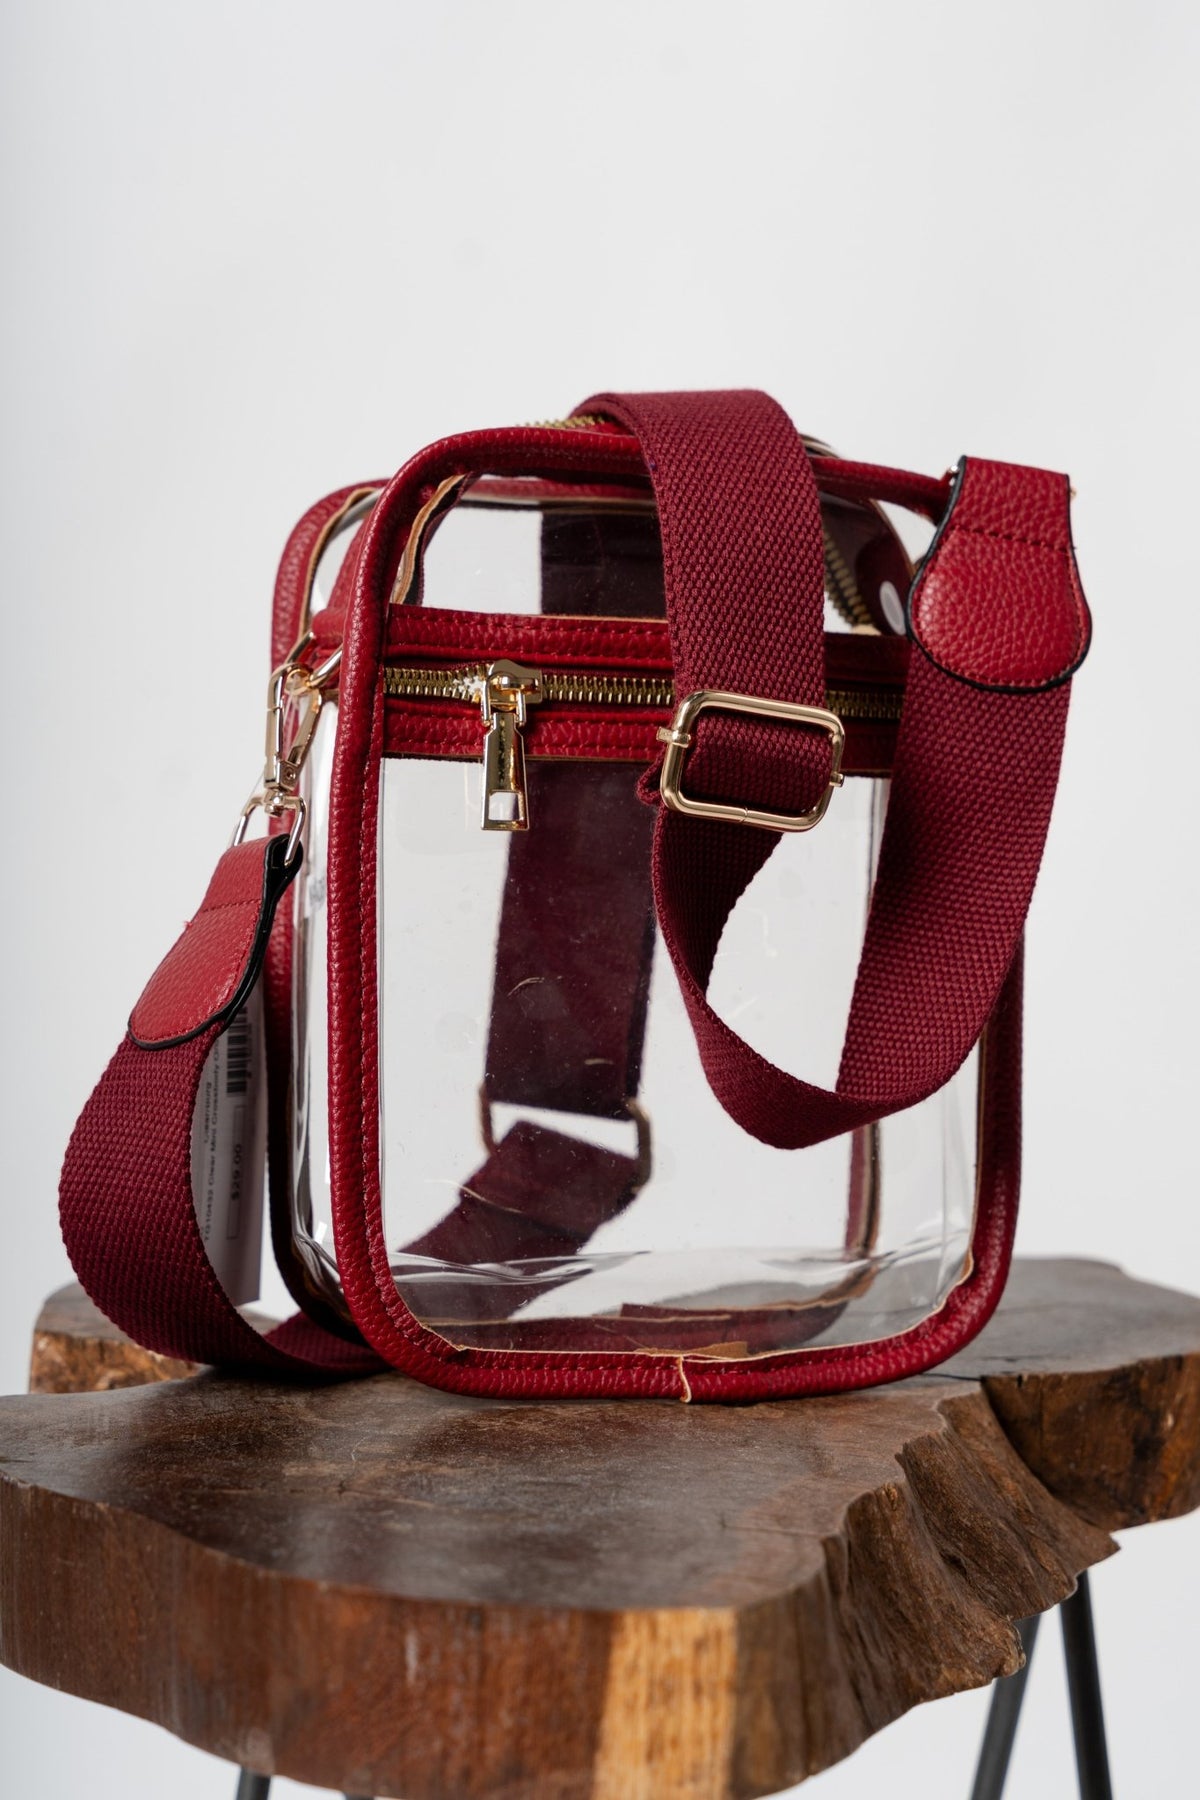 Clear crossbody stadium purse burgundy - Trendy Bags at Lush Fashion Lounge Boutique in Oklahoma City